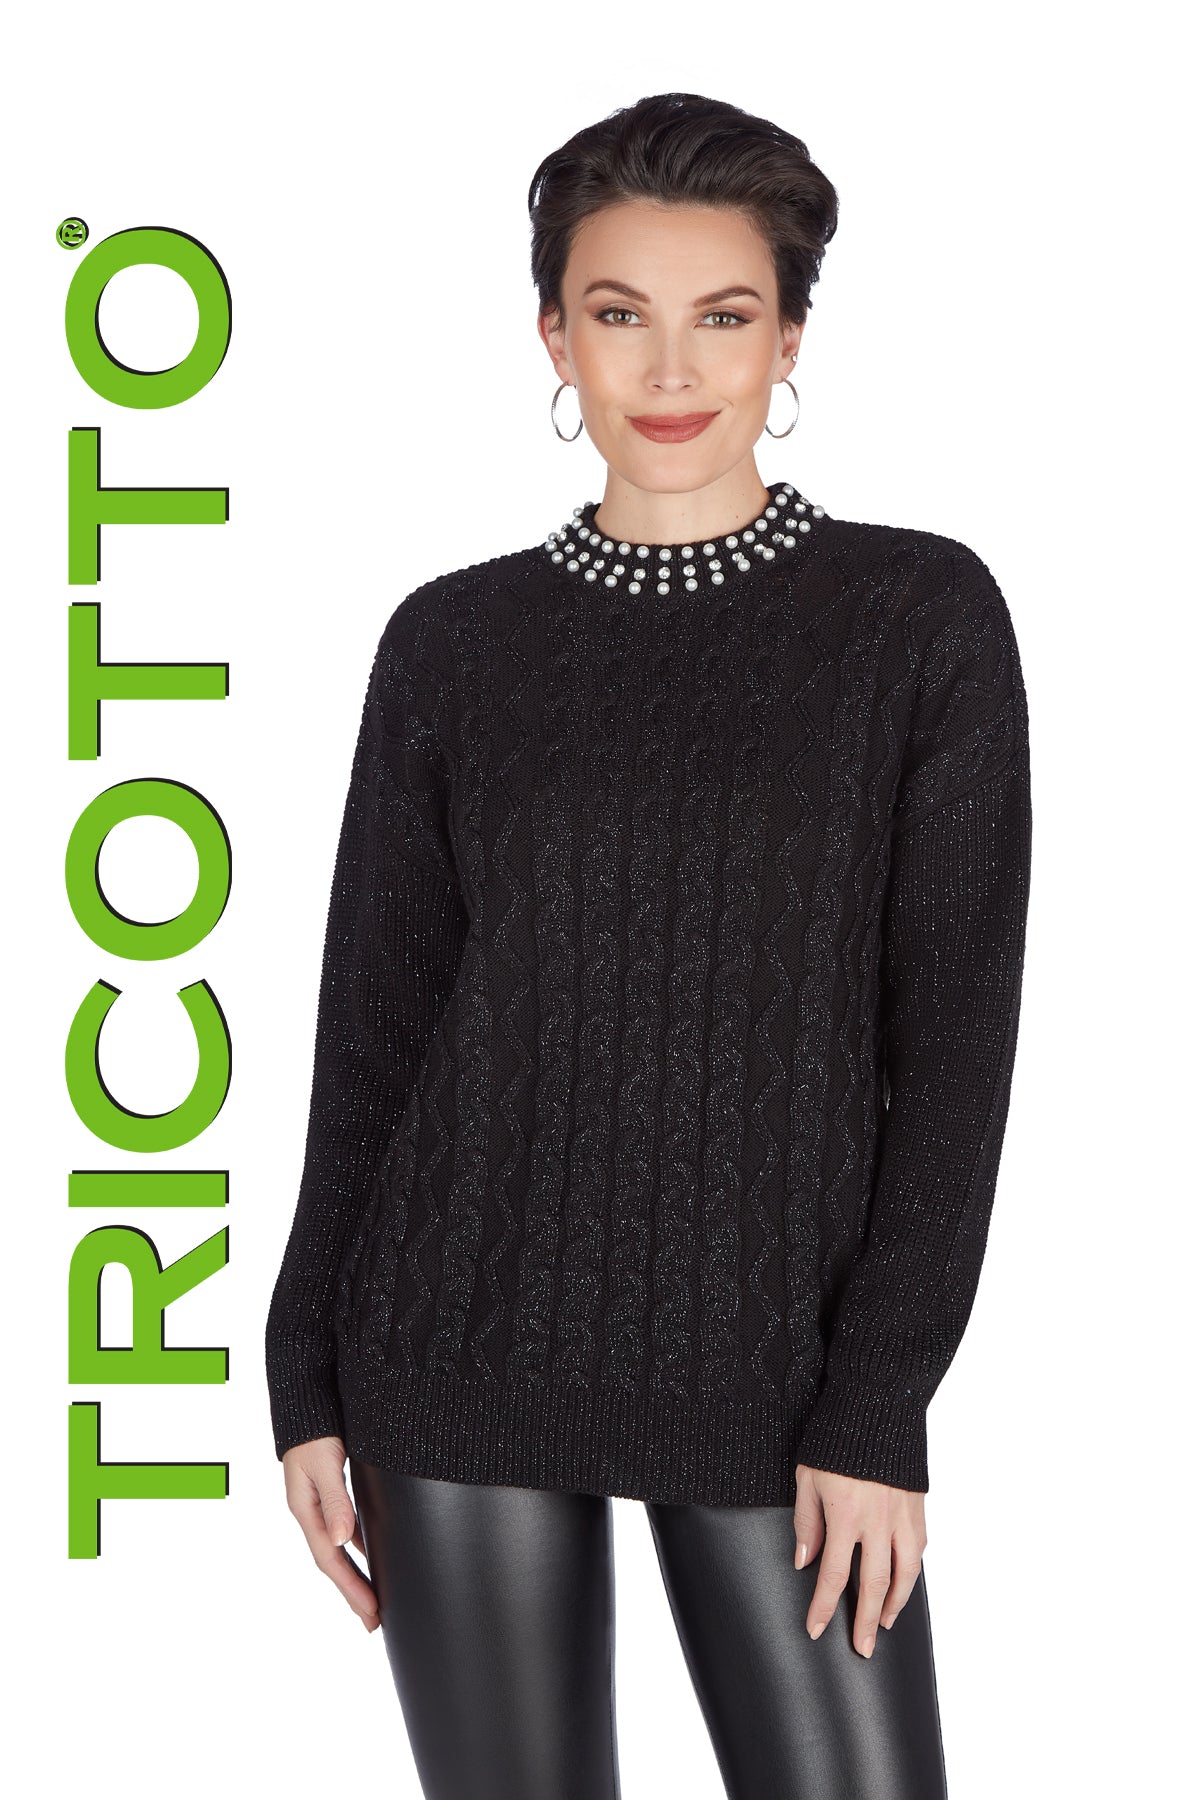 Tricotto Sweaters-Buy Tricotto Sweaters Online-Tricotto Online Sweater Shop-Tricotto White Sweater-Tricotto Black Sweater